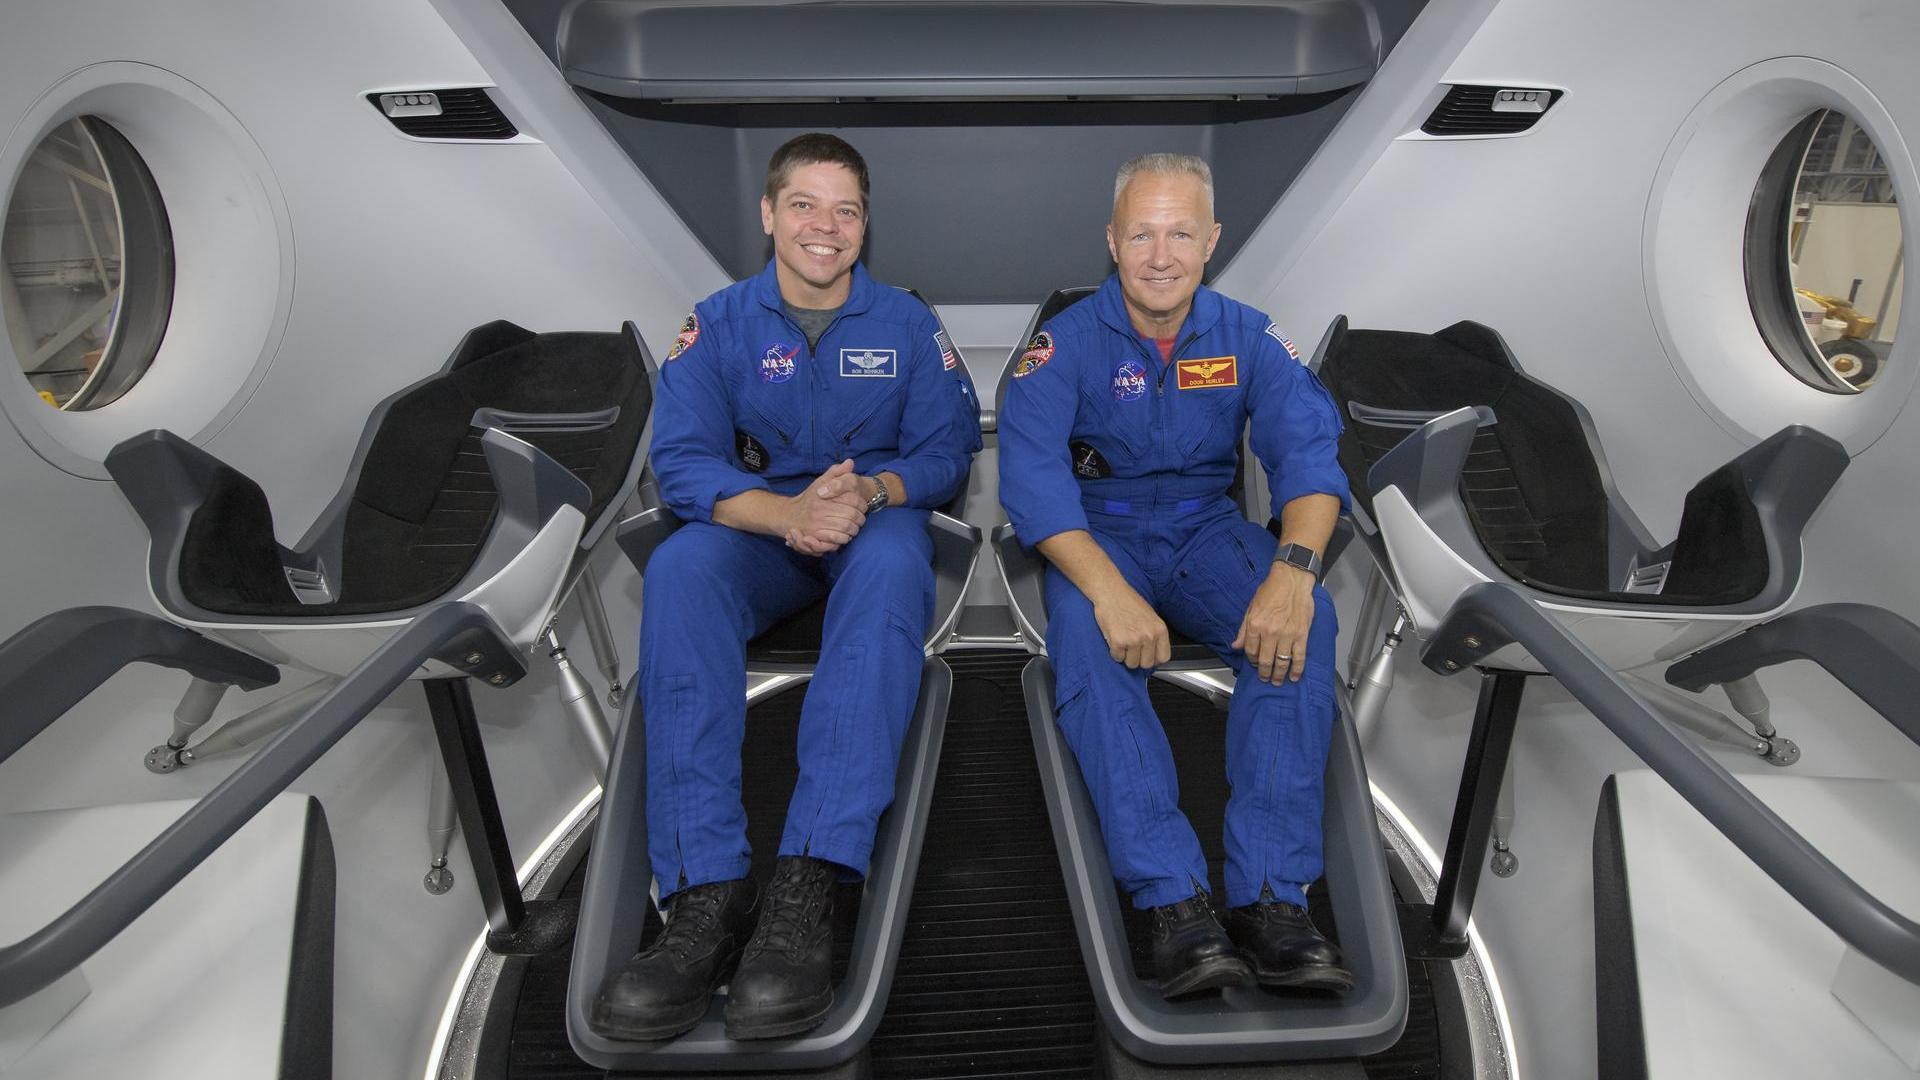 NASA Astronauts will enter quarantine mode ahead of SpaceX’s first crewed mission